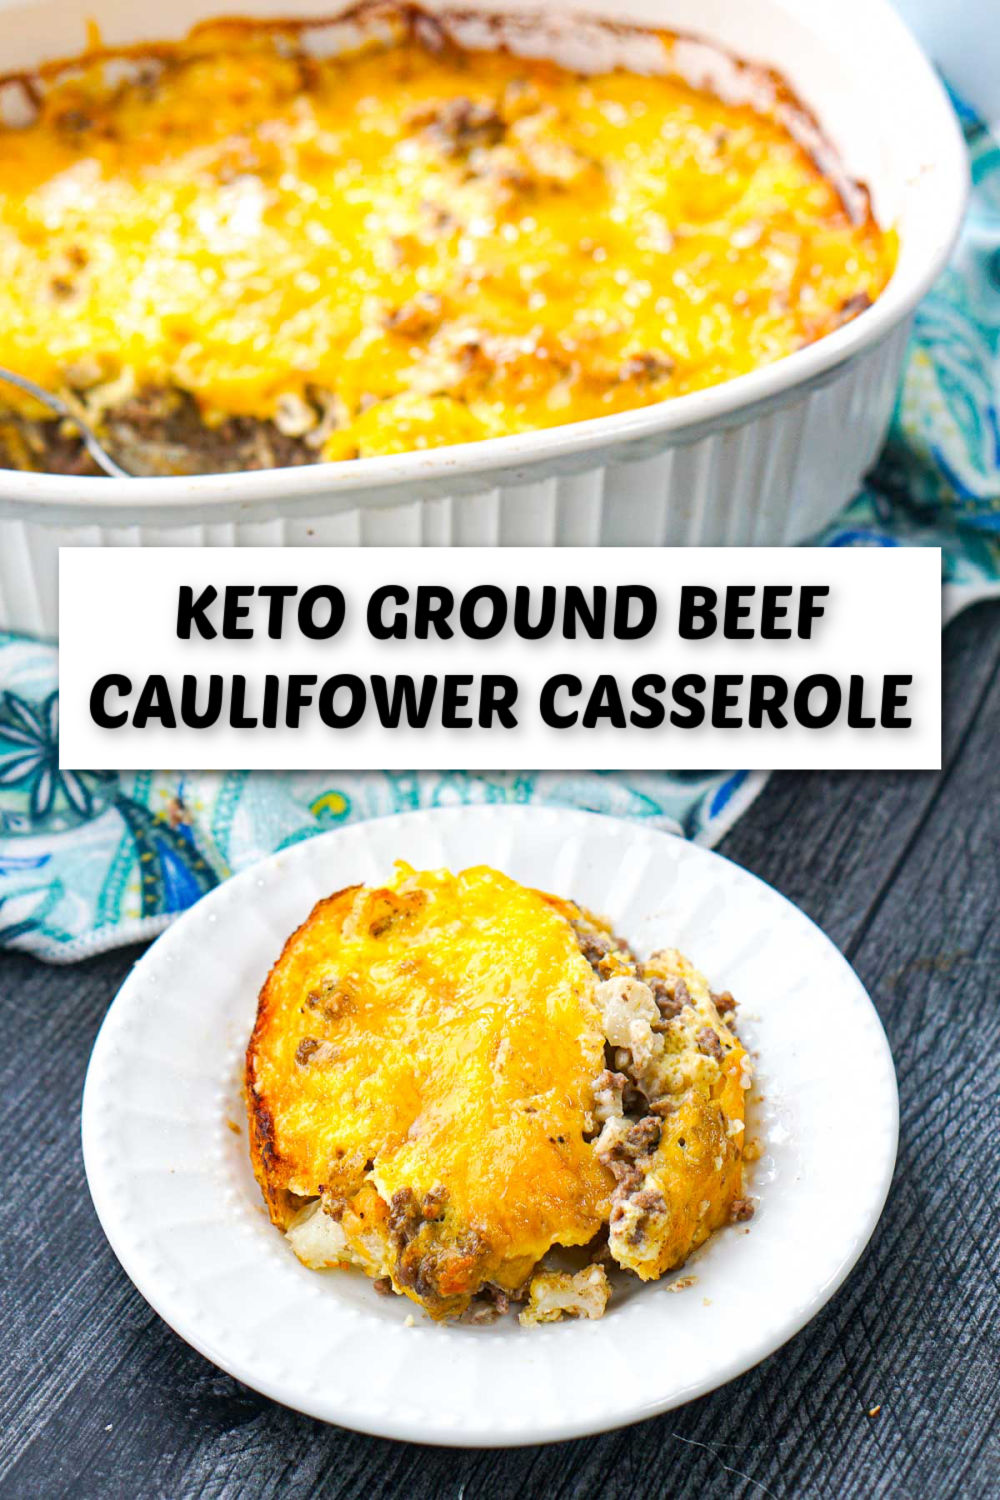 baking dish and plate with keto cheesy ground beef cauliflower casserole and text